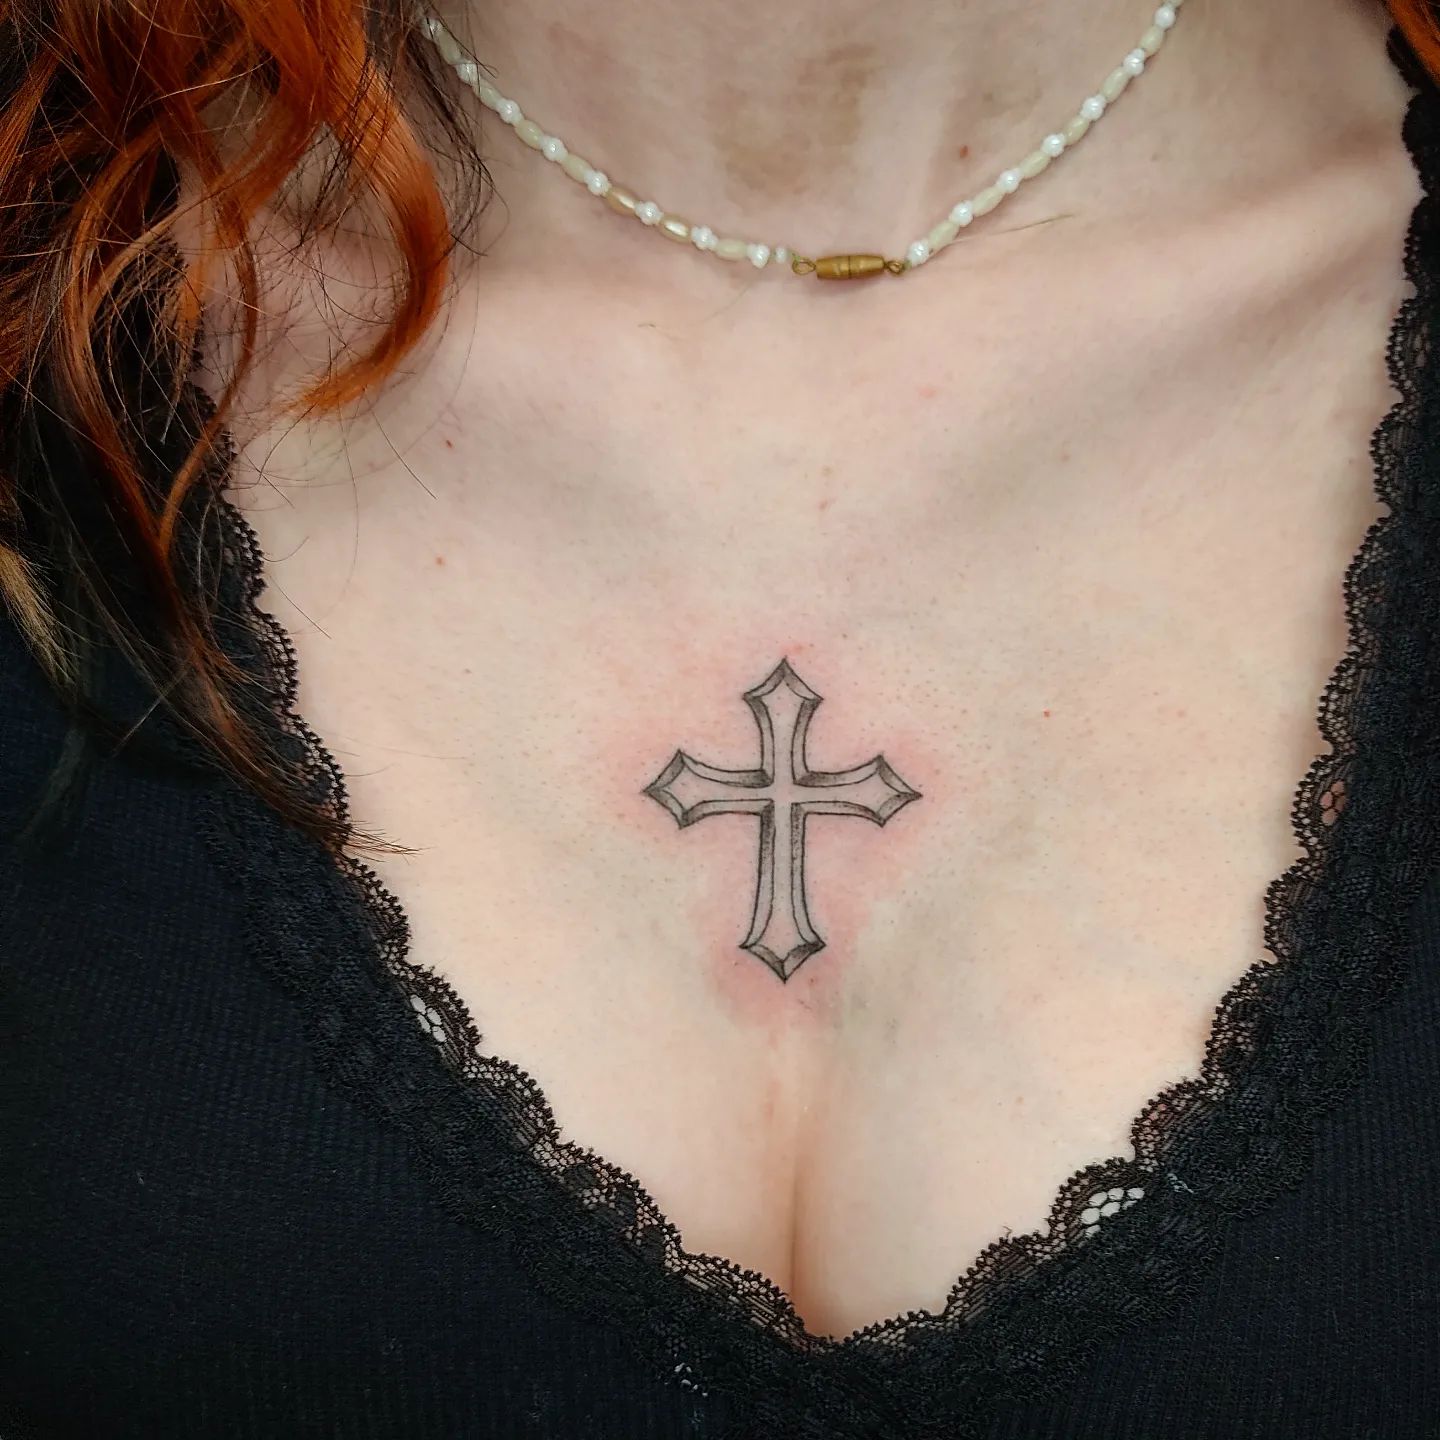 Let's turn your chest into an artpiece with this beautiful dainty cross. Sharp edges of this cross give it a perfect look. When people look at you, one of the first things they will notice will be your religious tattoo. Try it out.